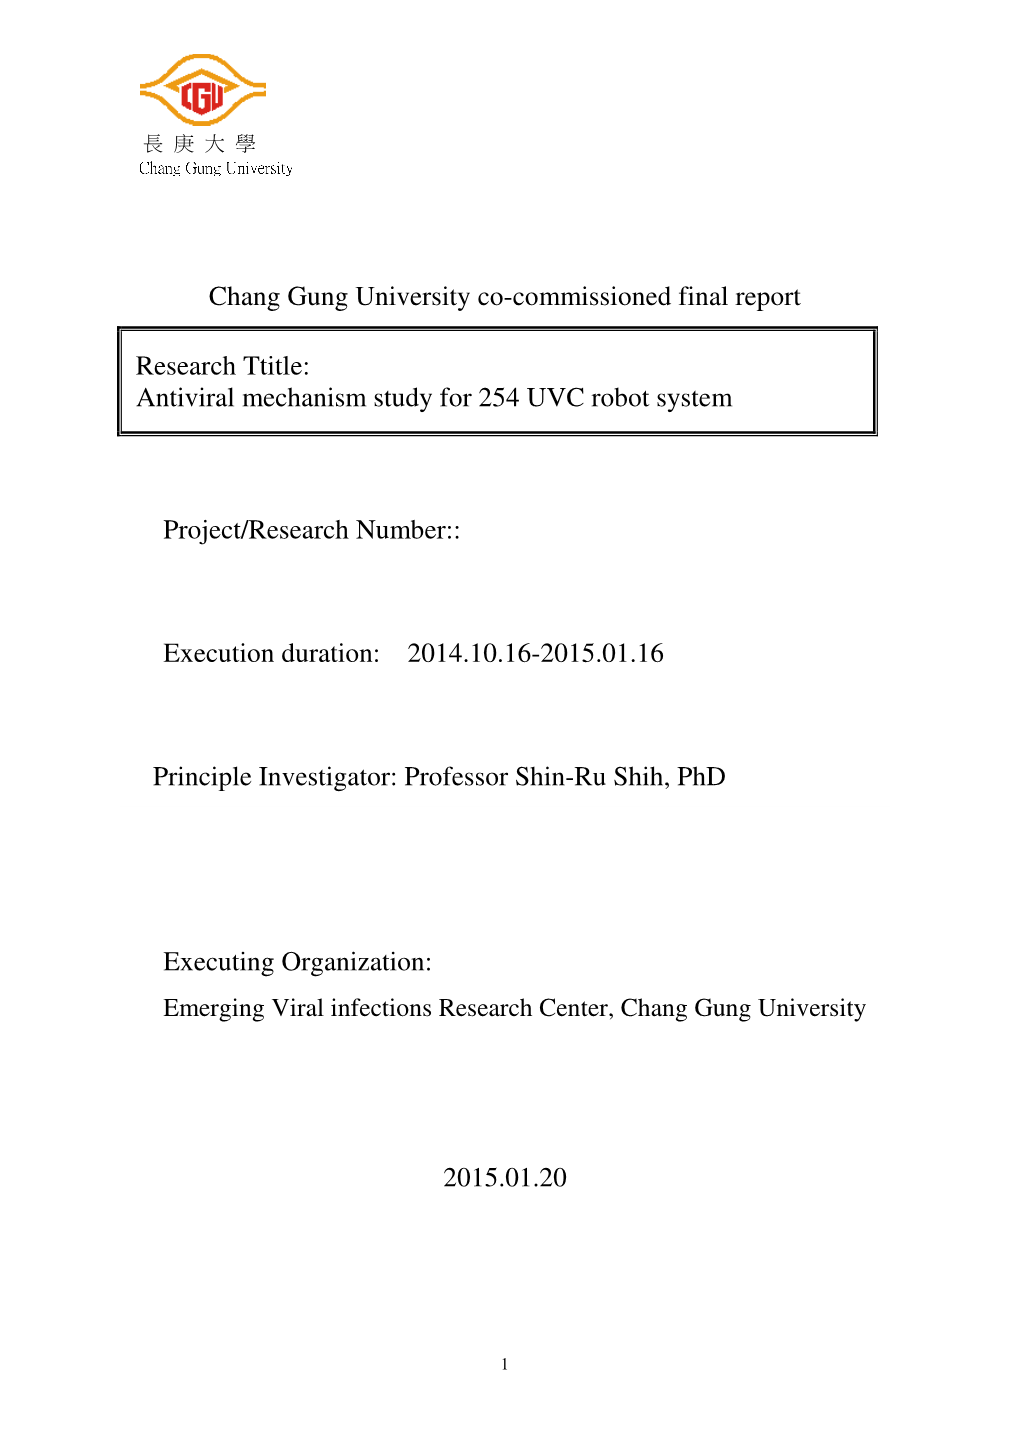 Chang Gung University Co-Commissioned Final Report Research Ttitle: Antiviral Mechanism Study for 254 UVC Robot System Project/R